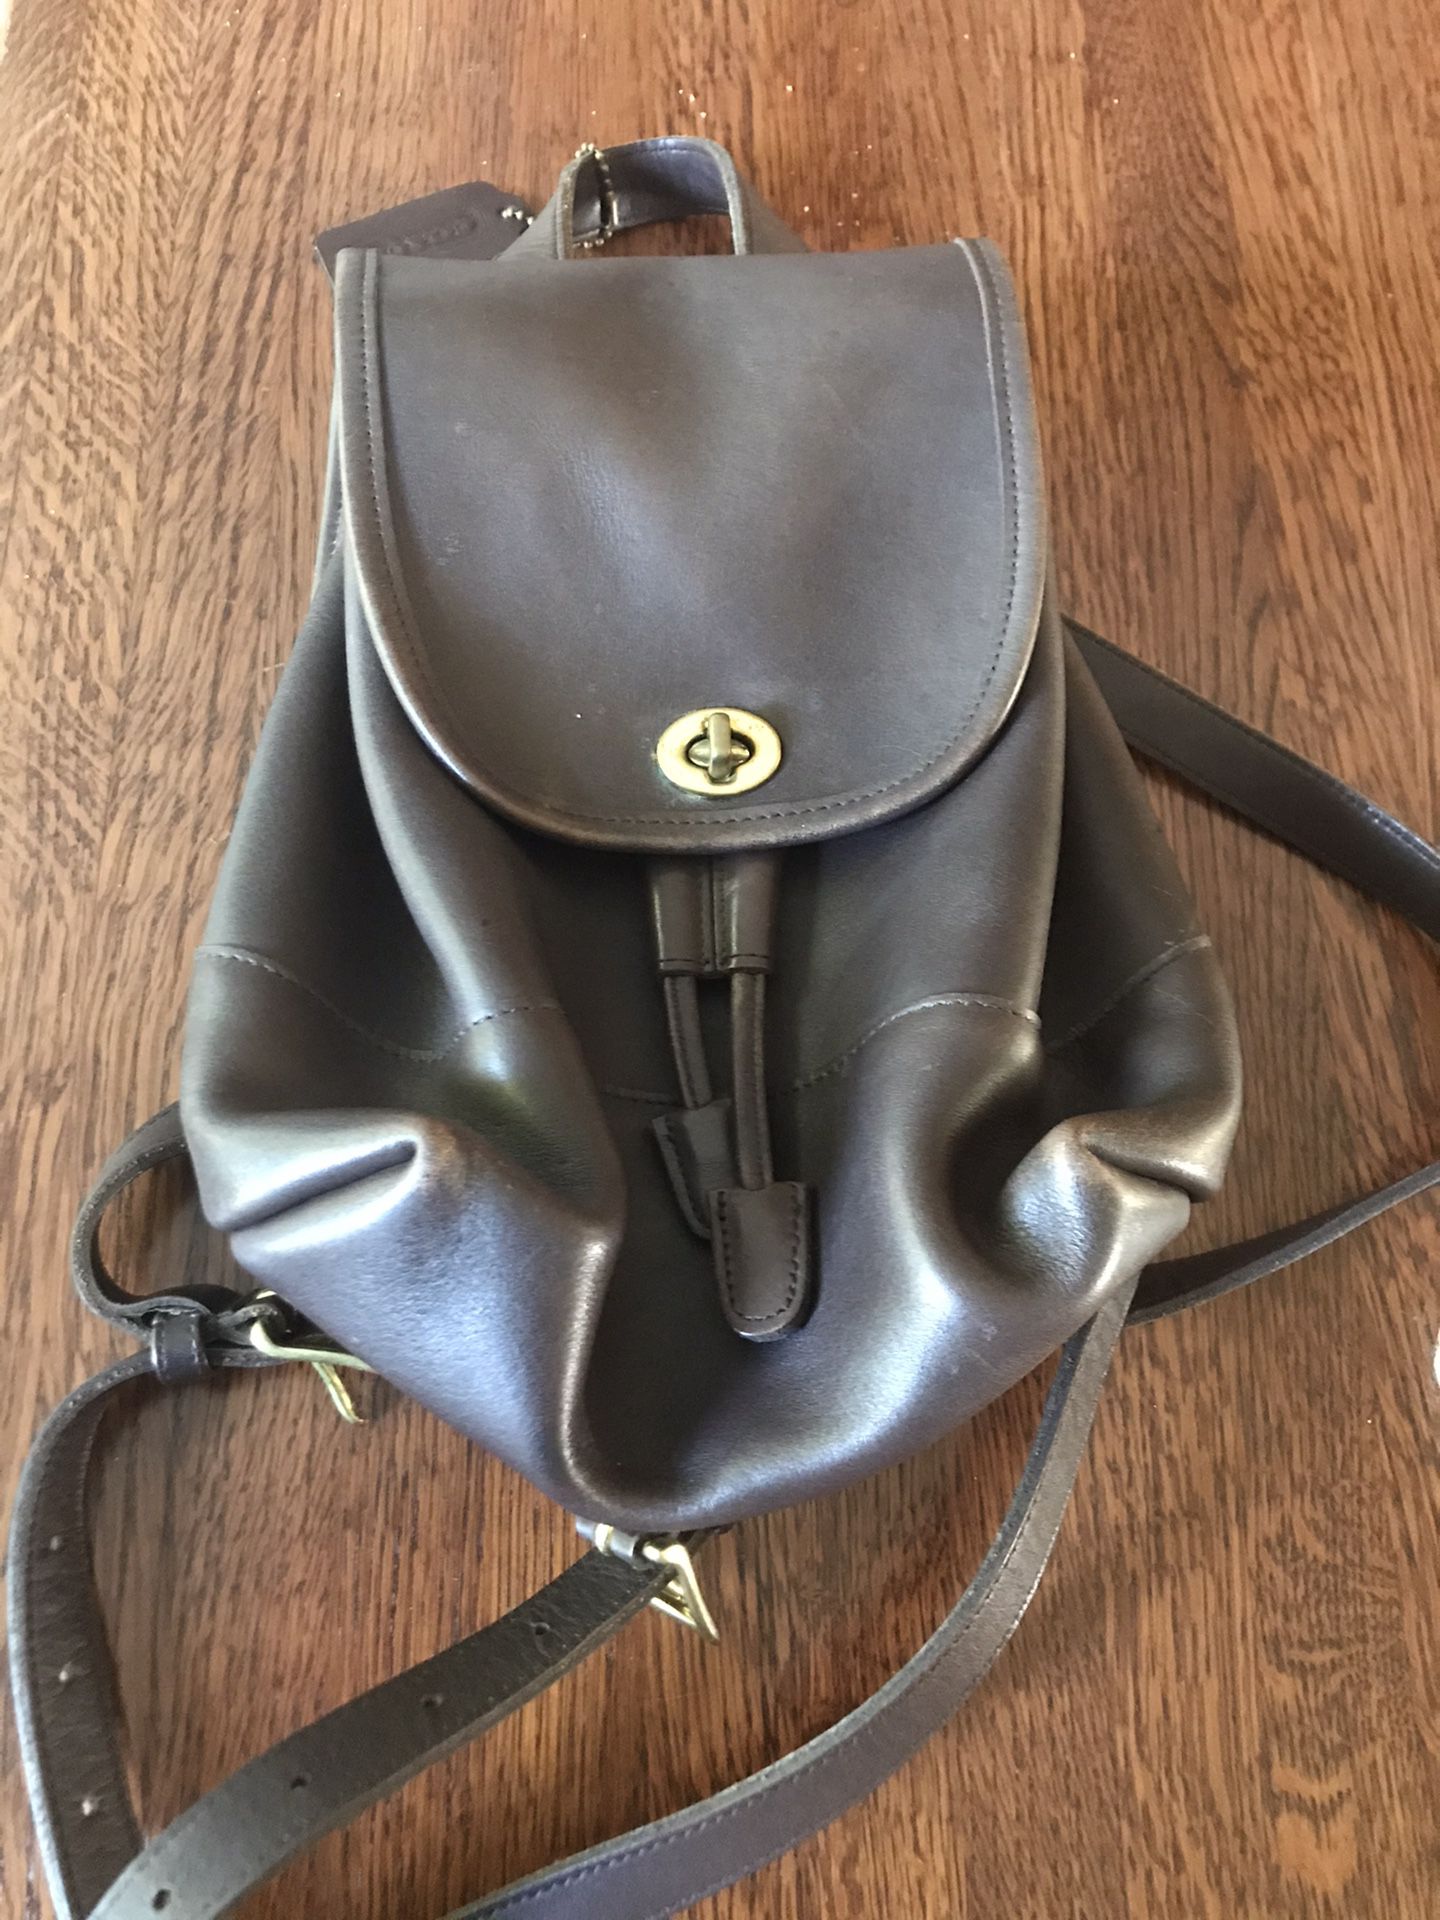 Coach Vintage Small Backpack Dark Brown - Willing to negotiate.